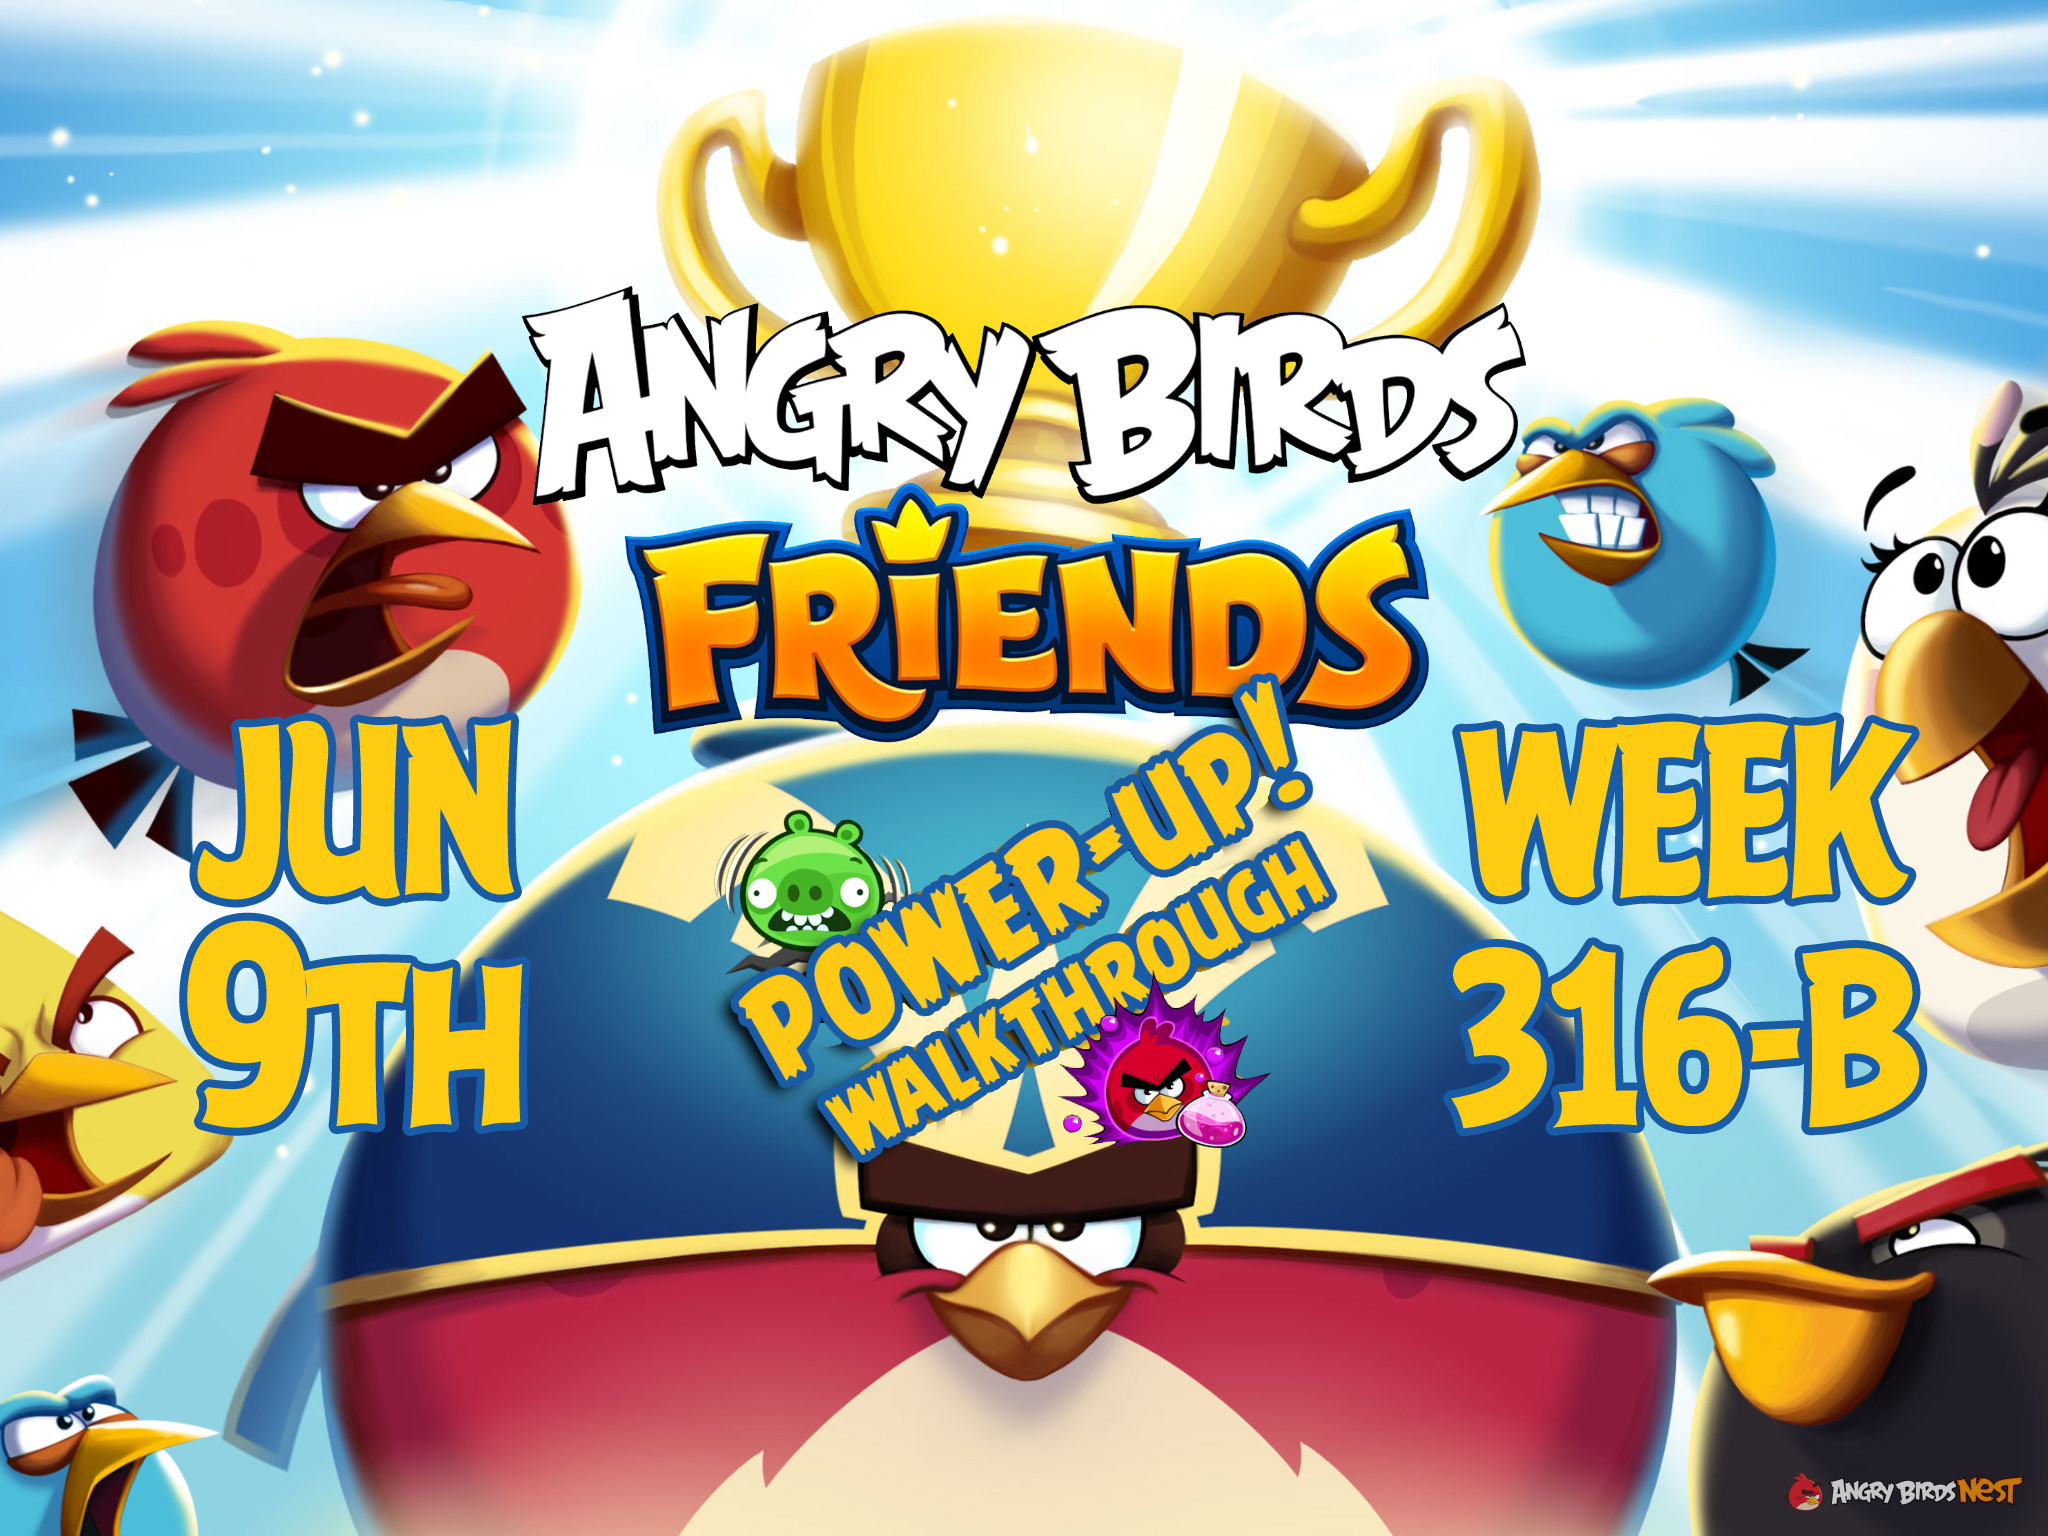 Angry-Birds-Friends-Tournament-Week-316-B-Feature-Image-PU